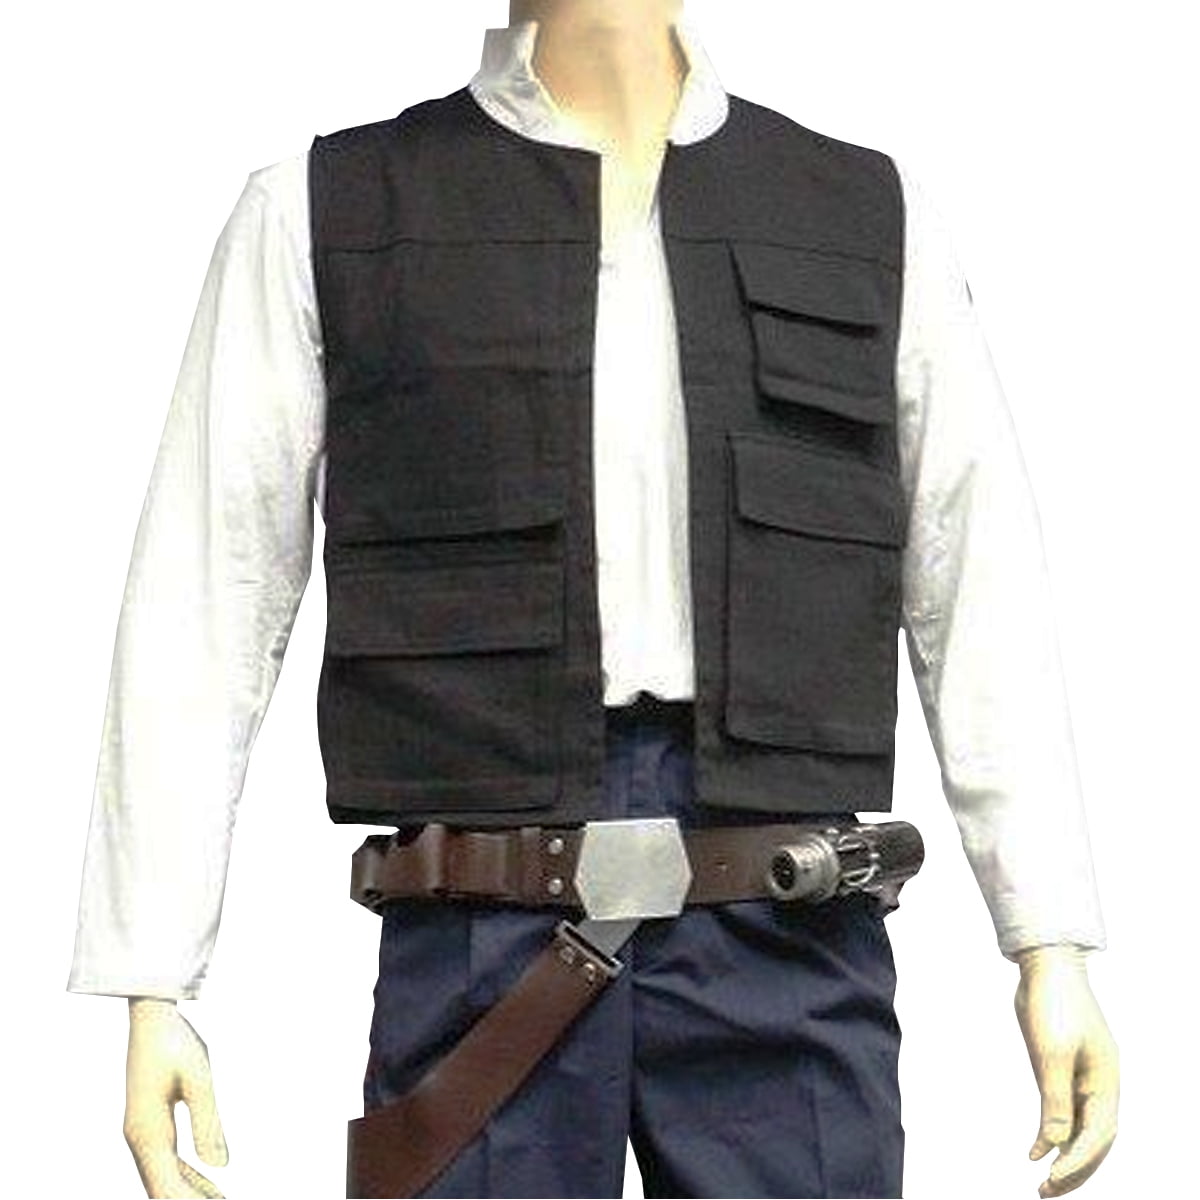 Fre Details about   Cosplay Star Wars A New Hope Han Solo Cosplay Costume Vest Shirt Pants 